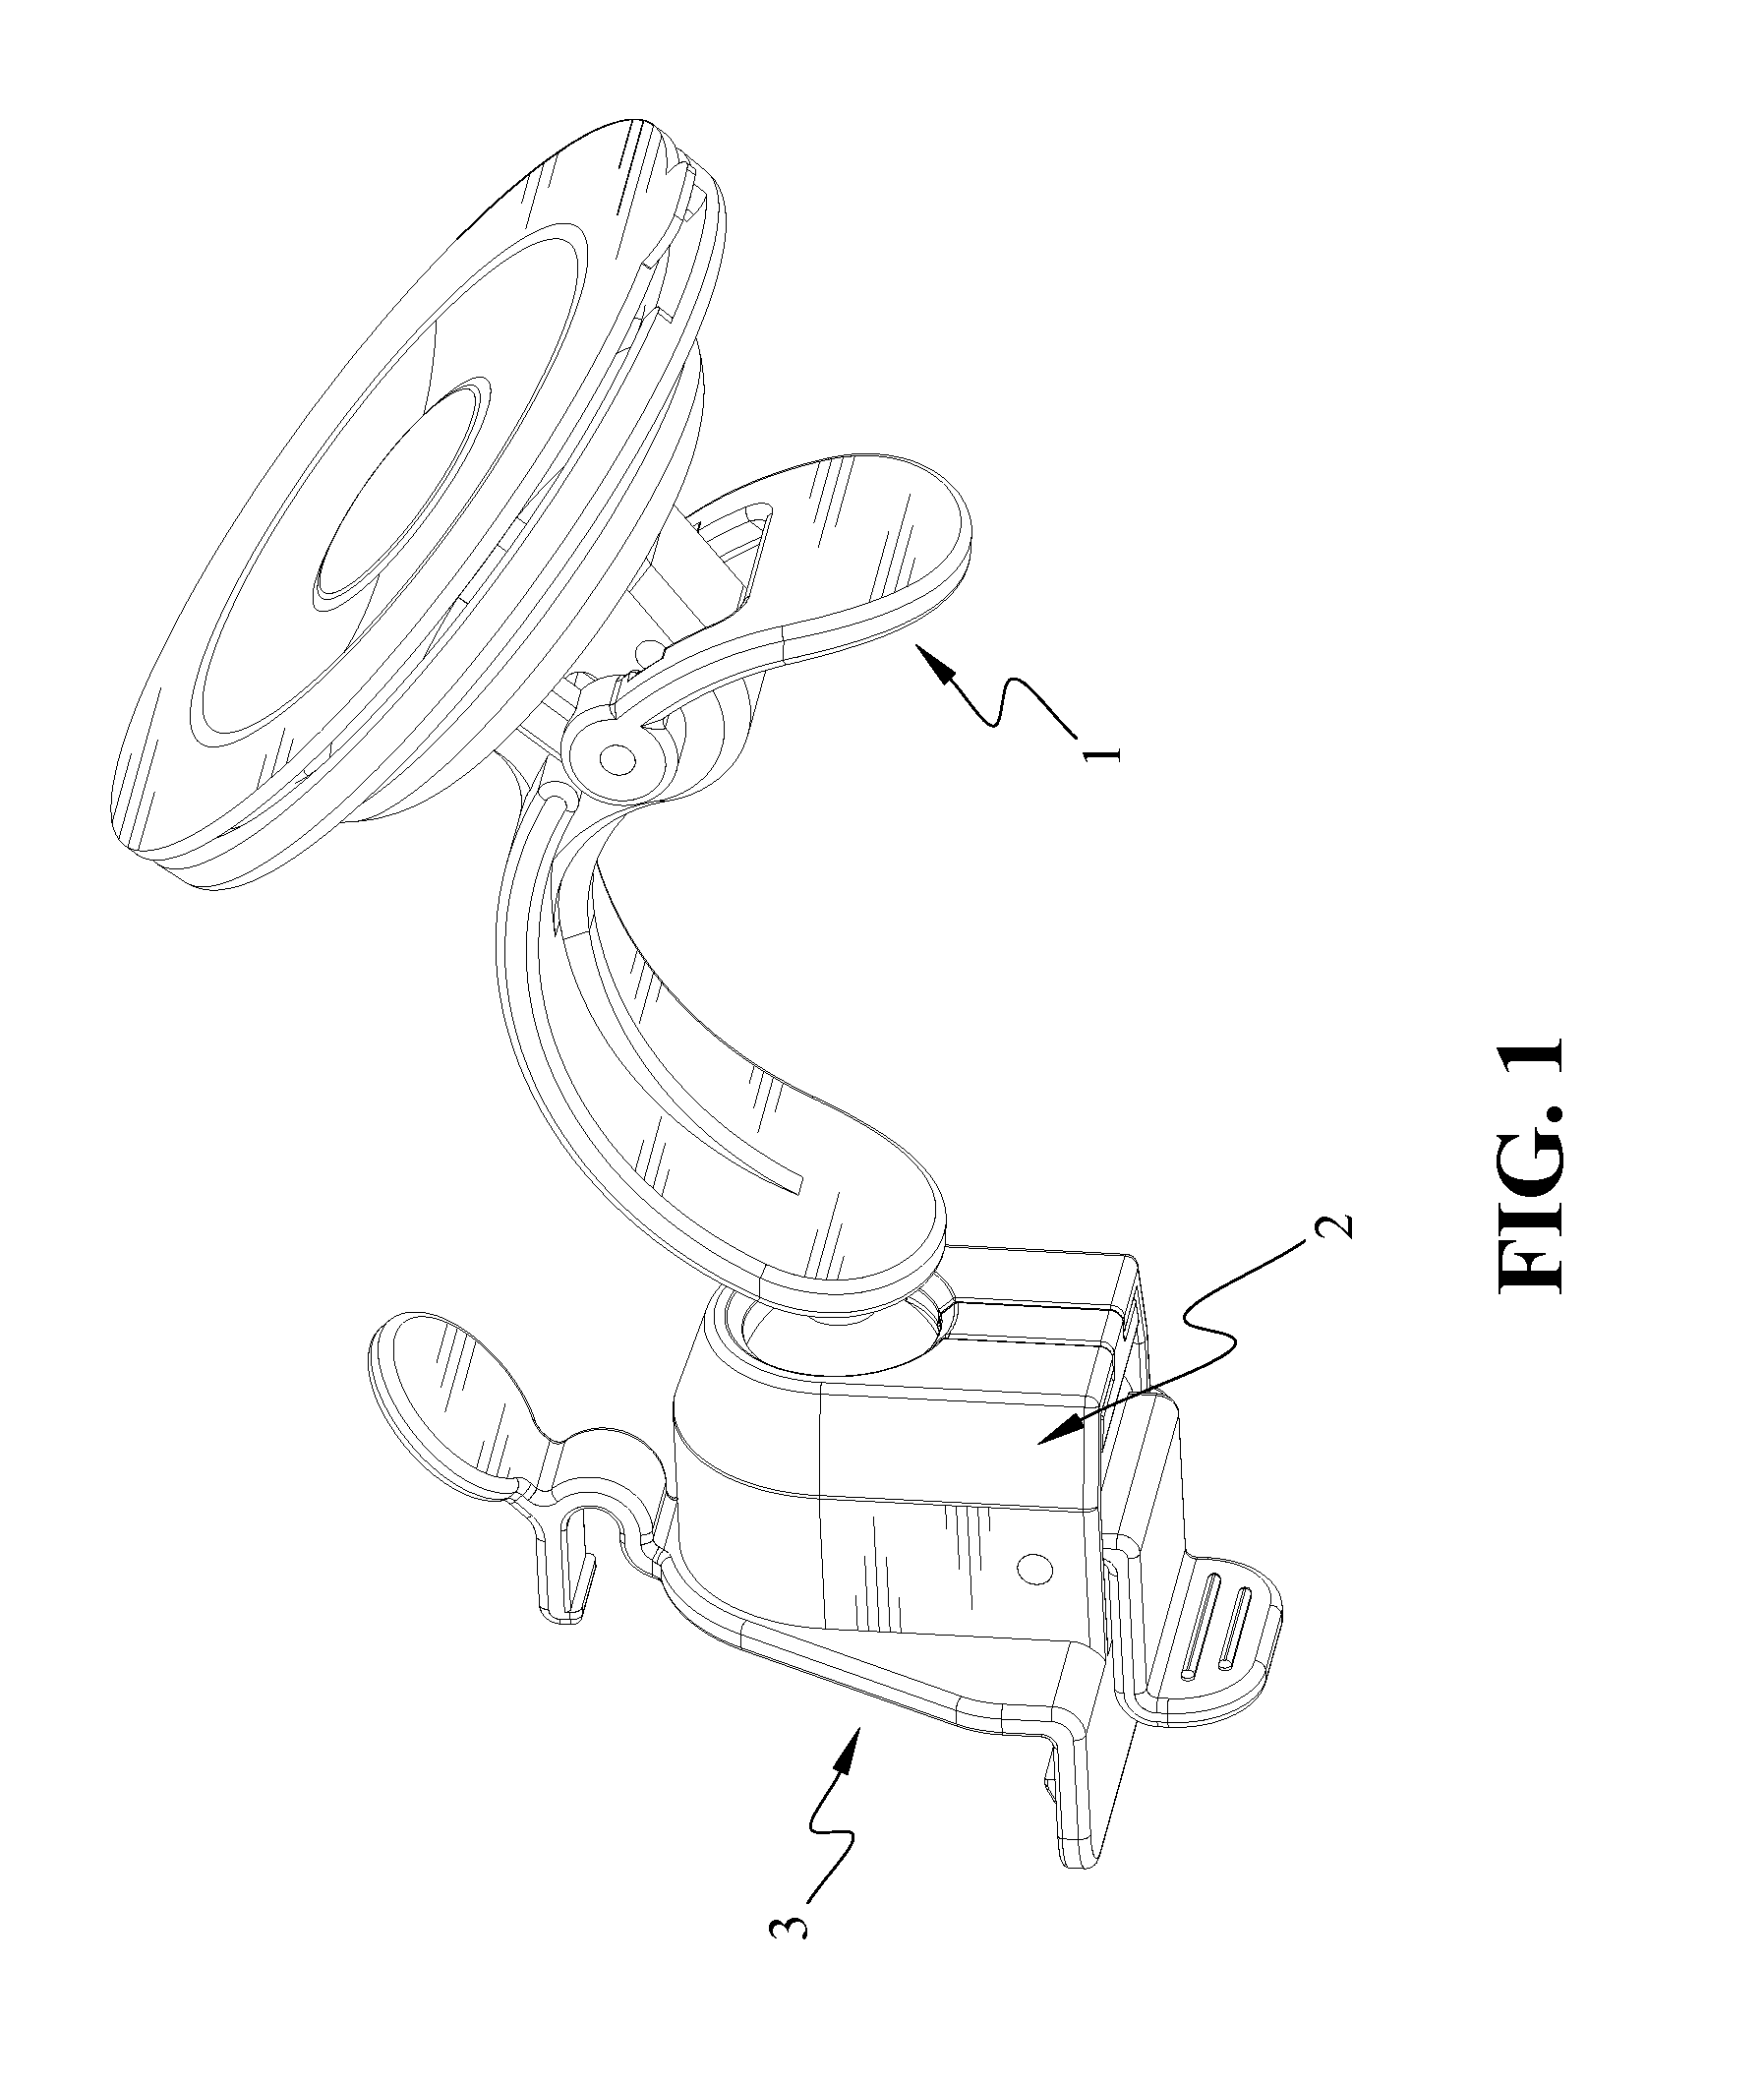 Mounting device for holding object